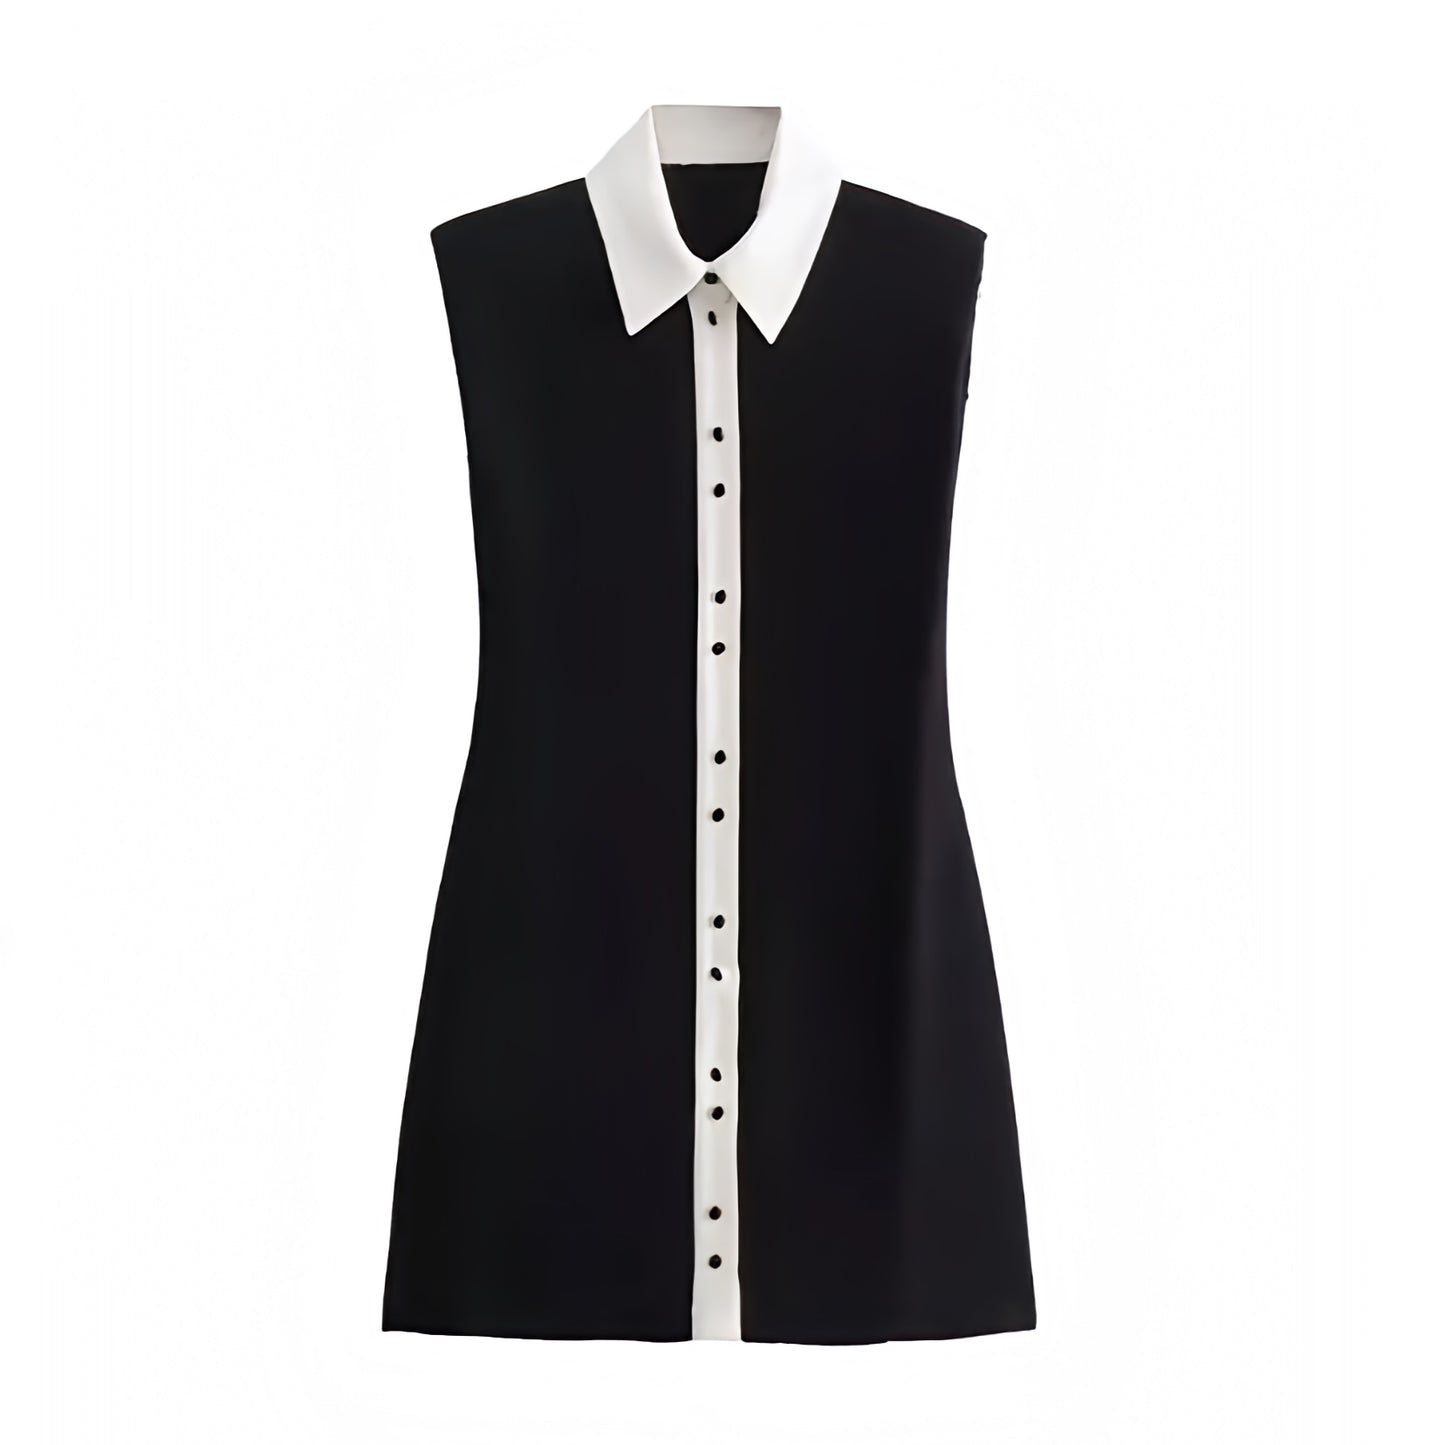 black-and-white-contrast-lined-outlined-bodycon-slim-fit-sleeveless-short-sleeve-solid-button-down-collar-v-neck-mini-dress-women-ladies-chic-trendy-spring-2024-summer-elegant-casual-semi-formal-classy-feminine-gala-european-parisian-old-money-date-night-out-90s-minimalist-office-siren-style-zara-revolve-aritzia-reformation-whitefox-princess-polly